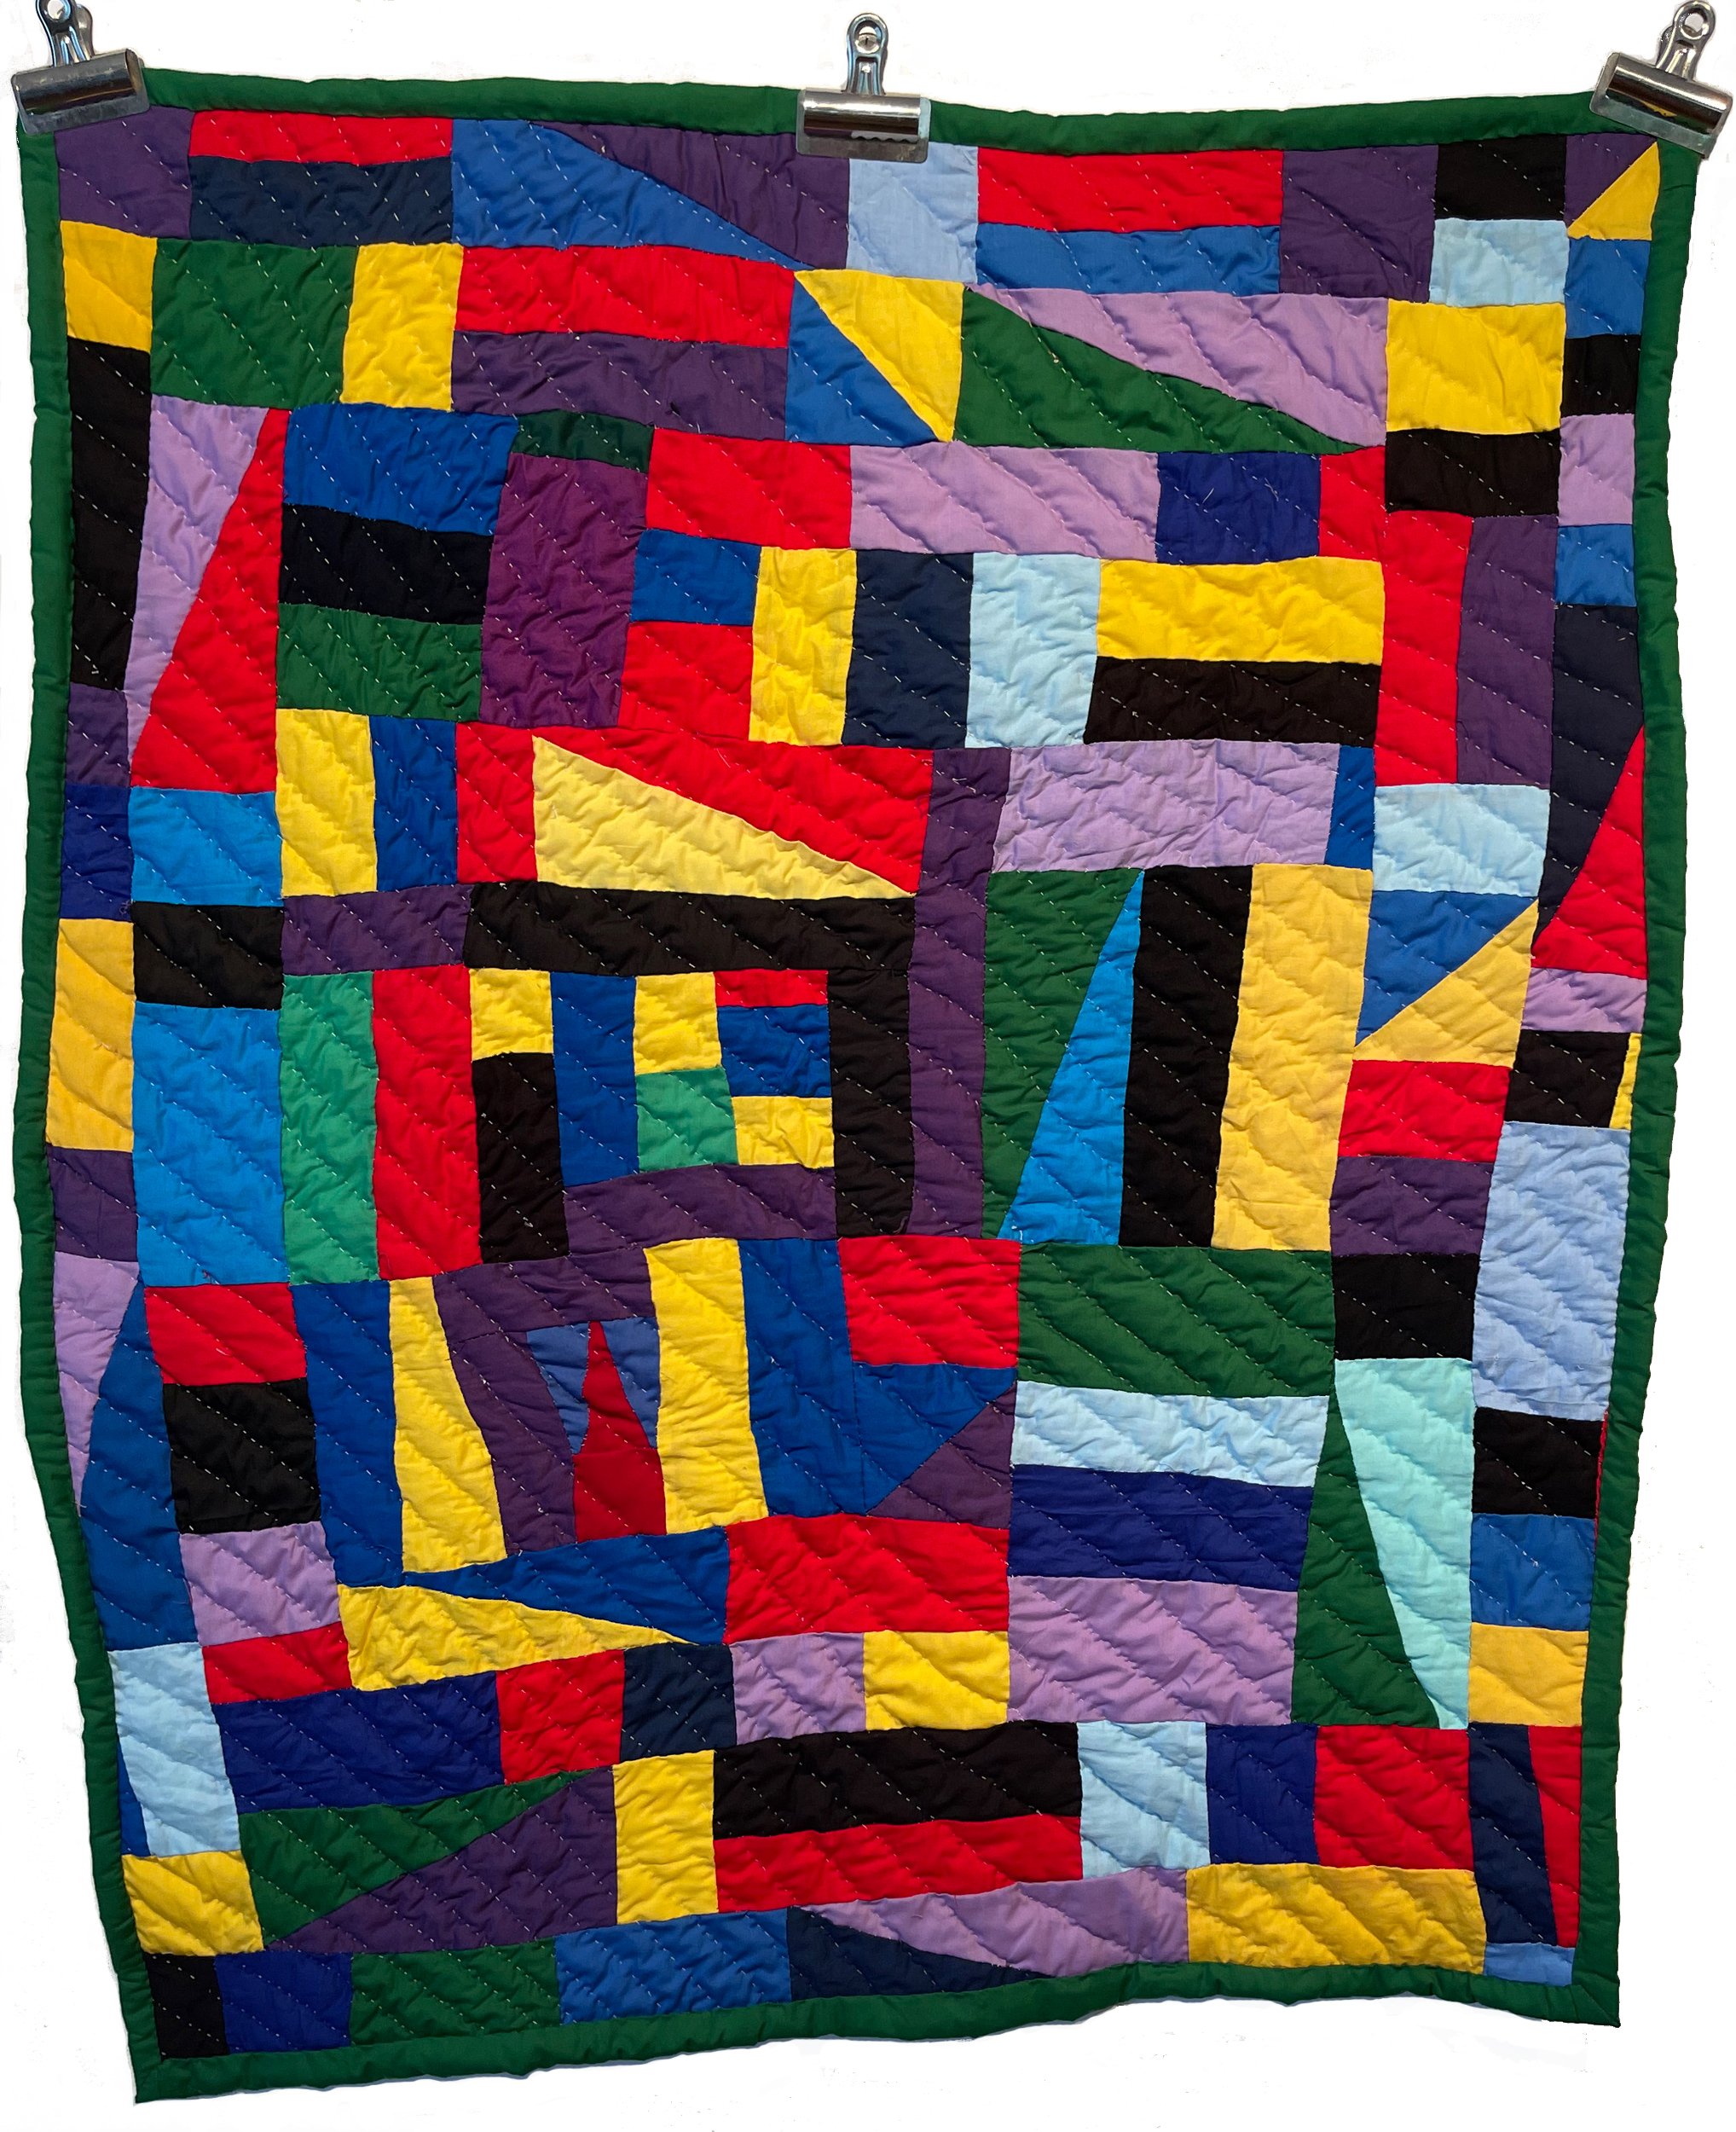   Stella Mae Pettway    Improvisational quilt, 2021   48” x 38.5”  Cotton fabrics  Hand-pieced, hand-quilted    LEARN MORE ABOUT THIS QUILT   